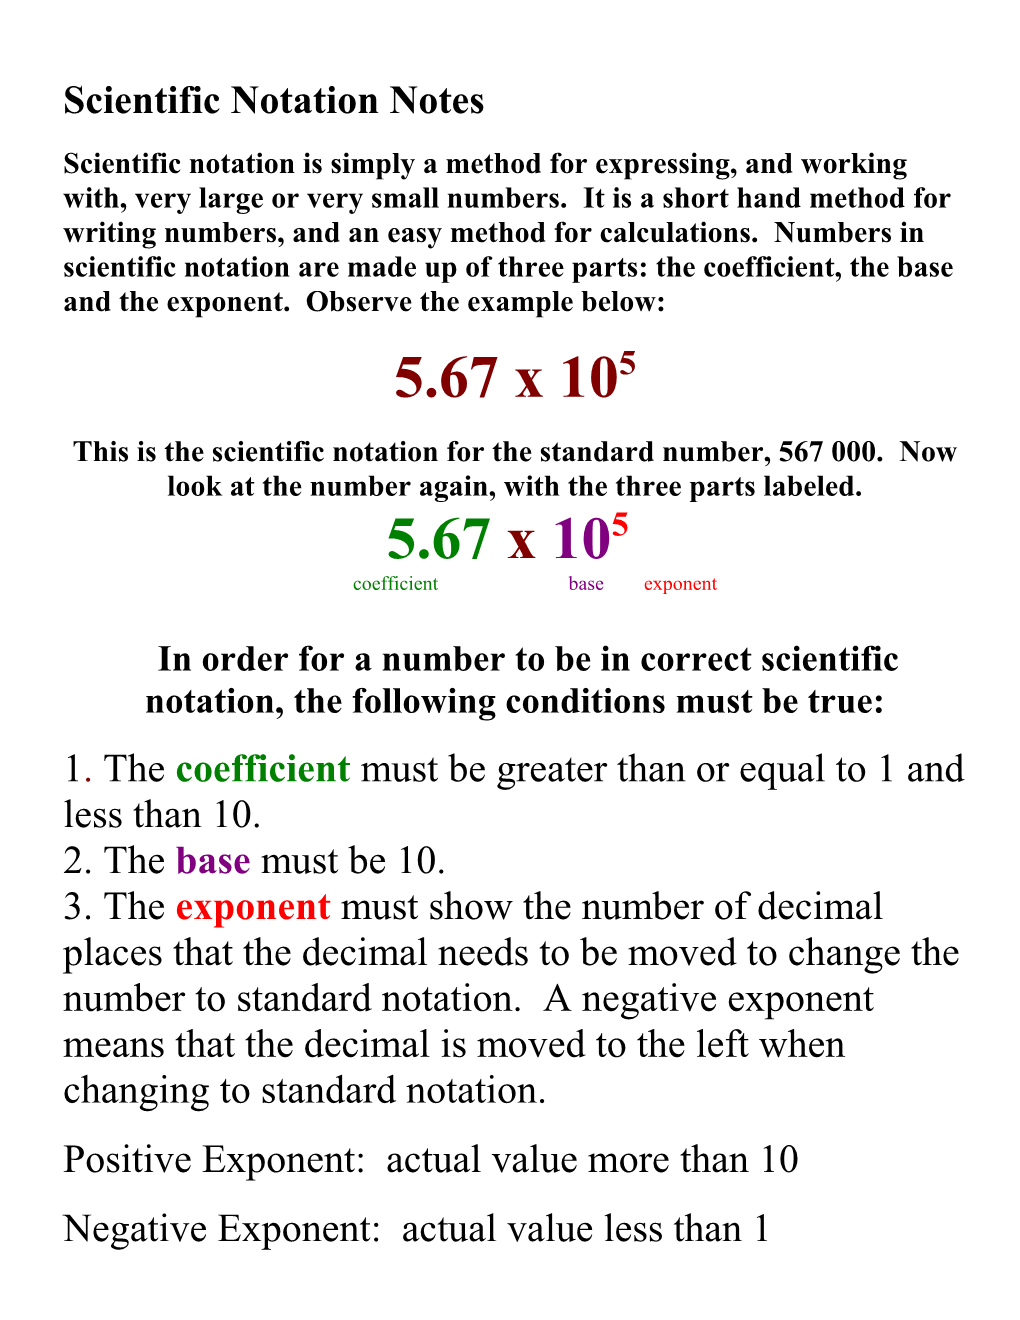 Scientific Notation Is Simply a Method for Expressing, and Working With, Very Large Or